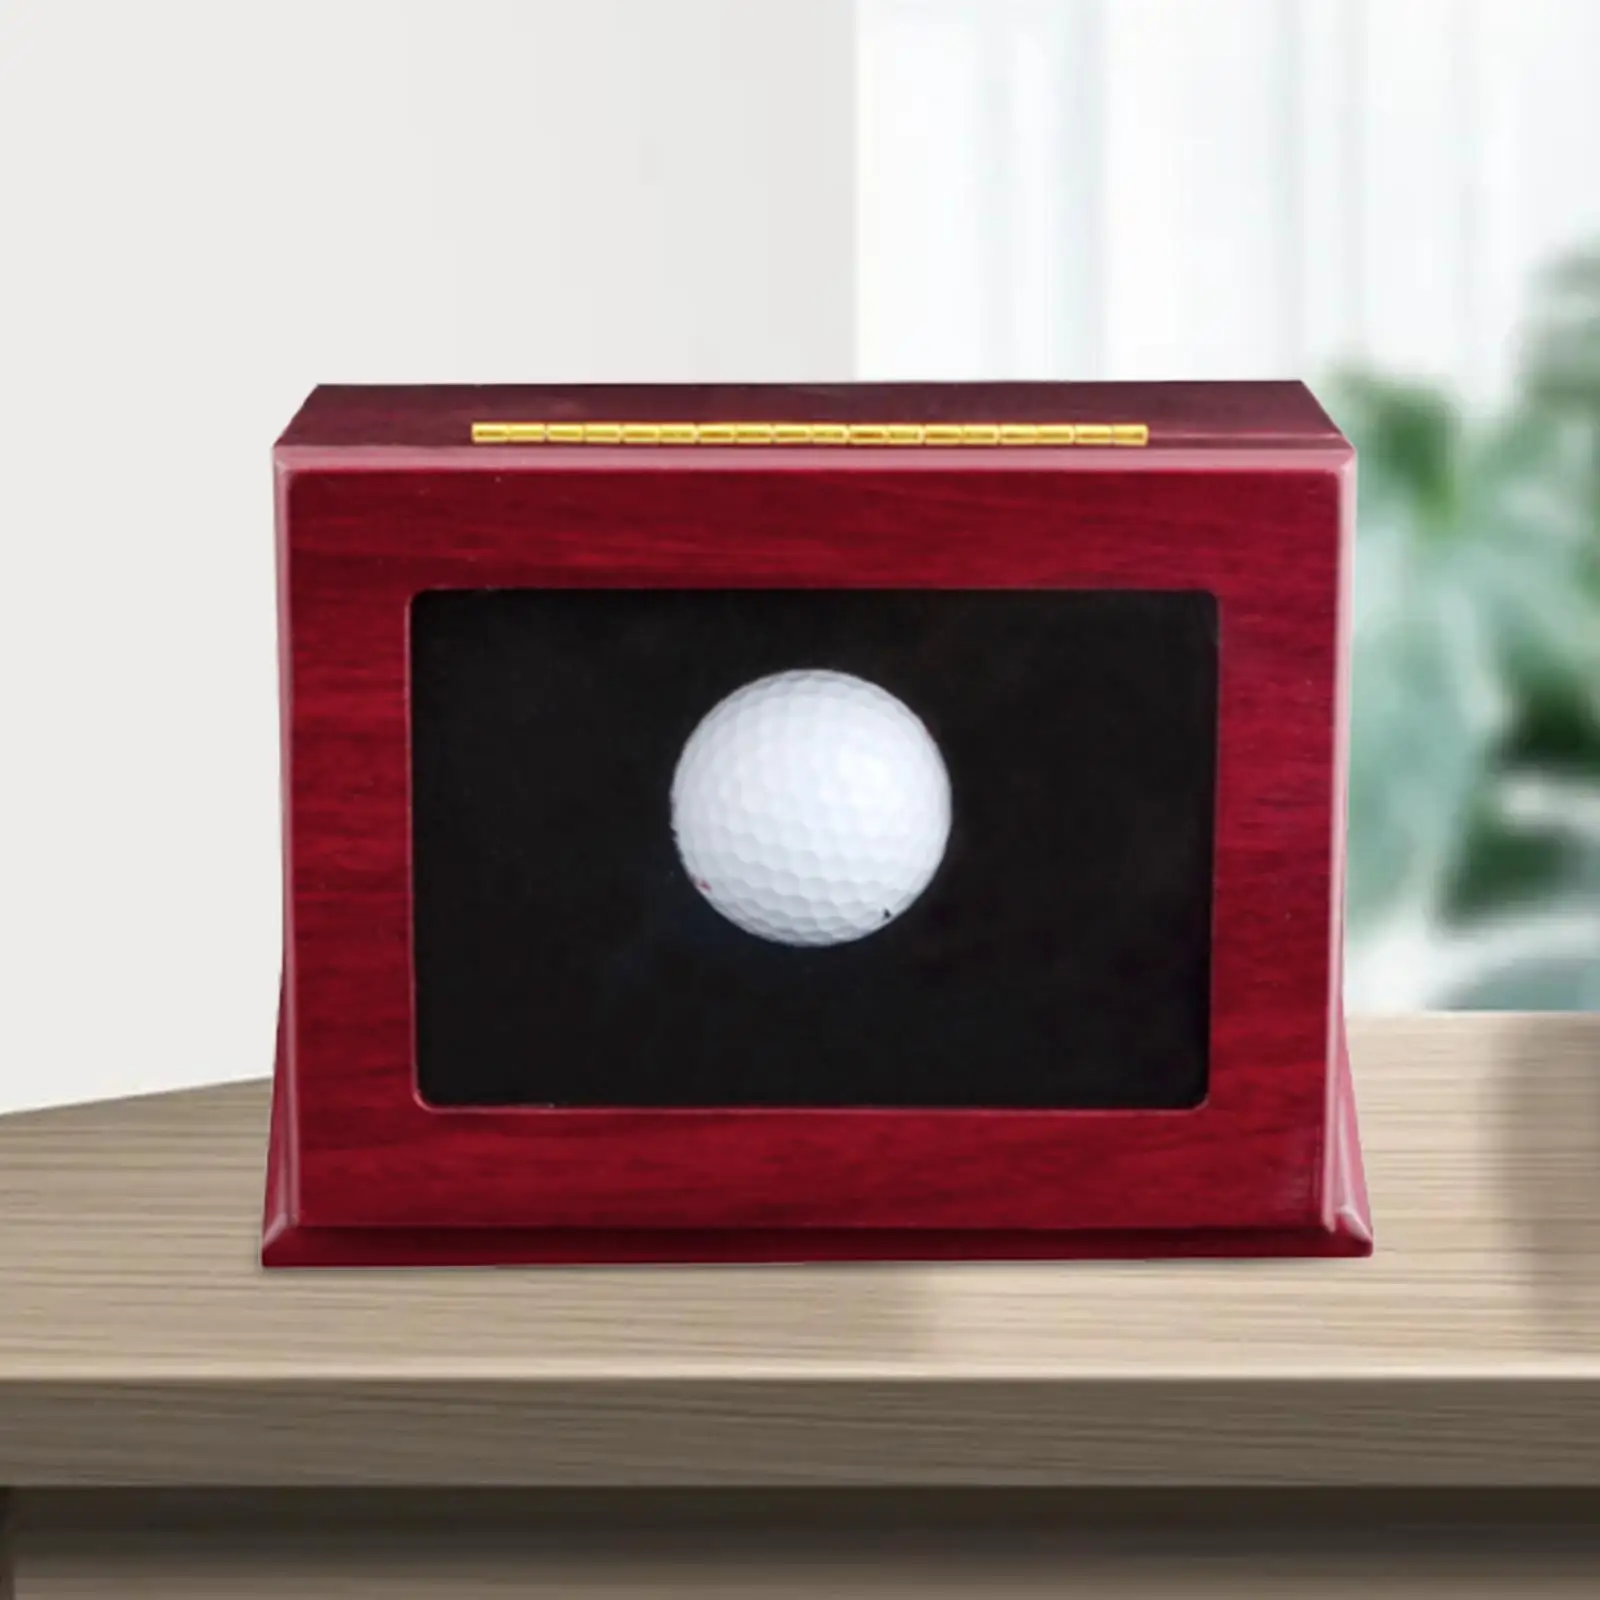 Golf Ball Display Case Decorative Box Dustproof Wood for Men and Women Collection Golf Ball Holder Golf Ball Storage Box